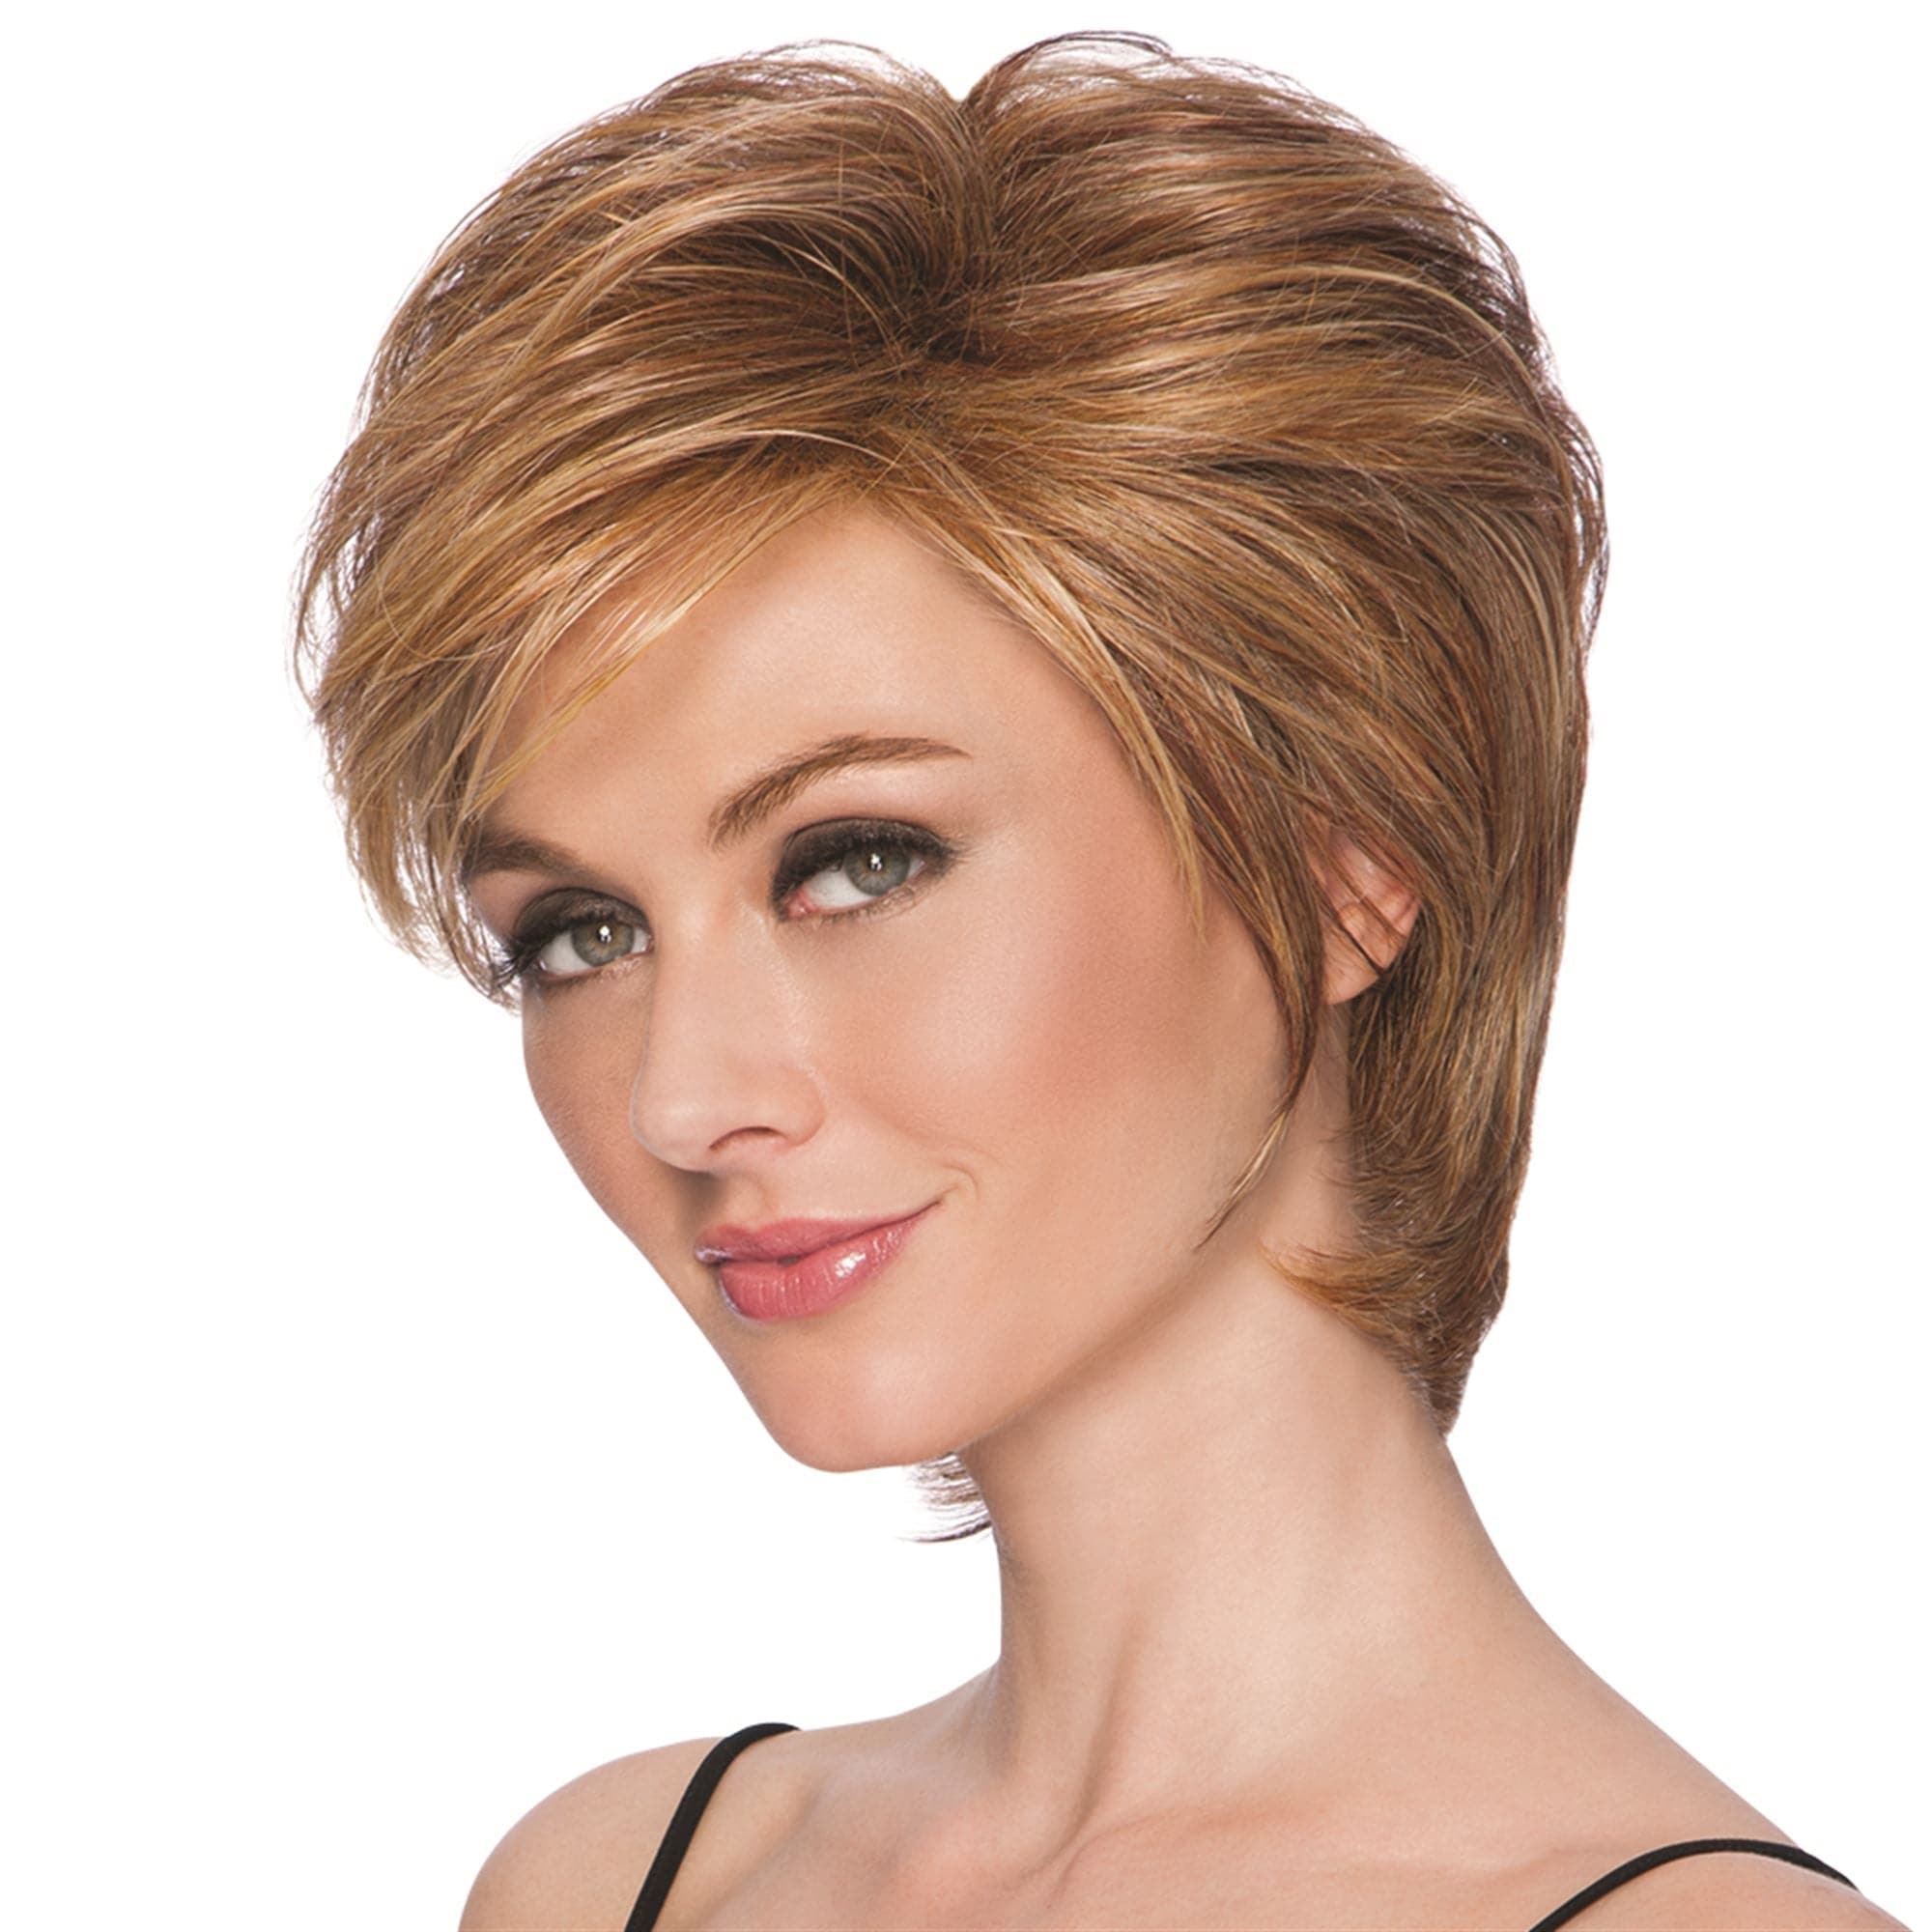 SHORT TAPERED CROP Wig | Hairdo - TWC- The Wig Company